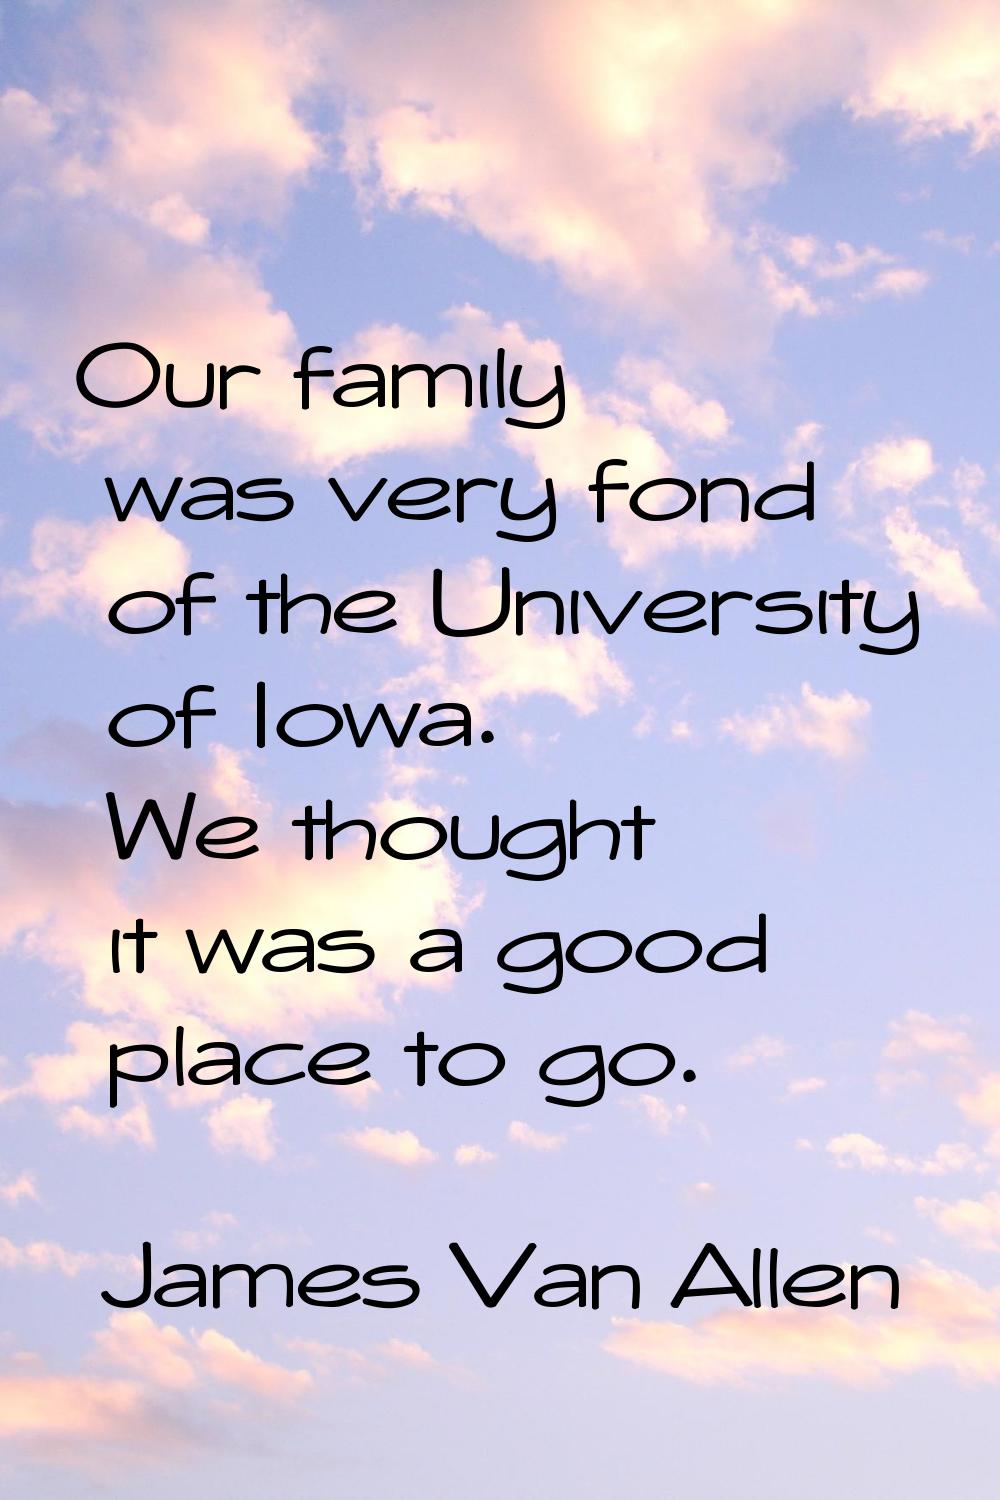 Our family was very fond of the University of Iowa. We thought it was a good place to go.